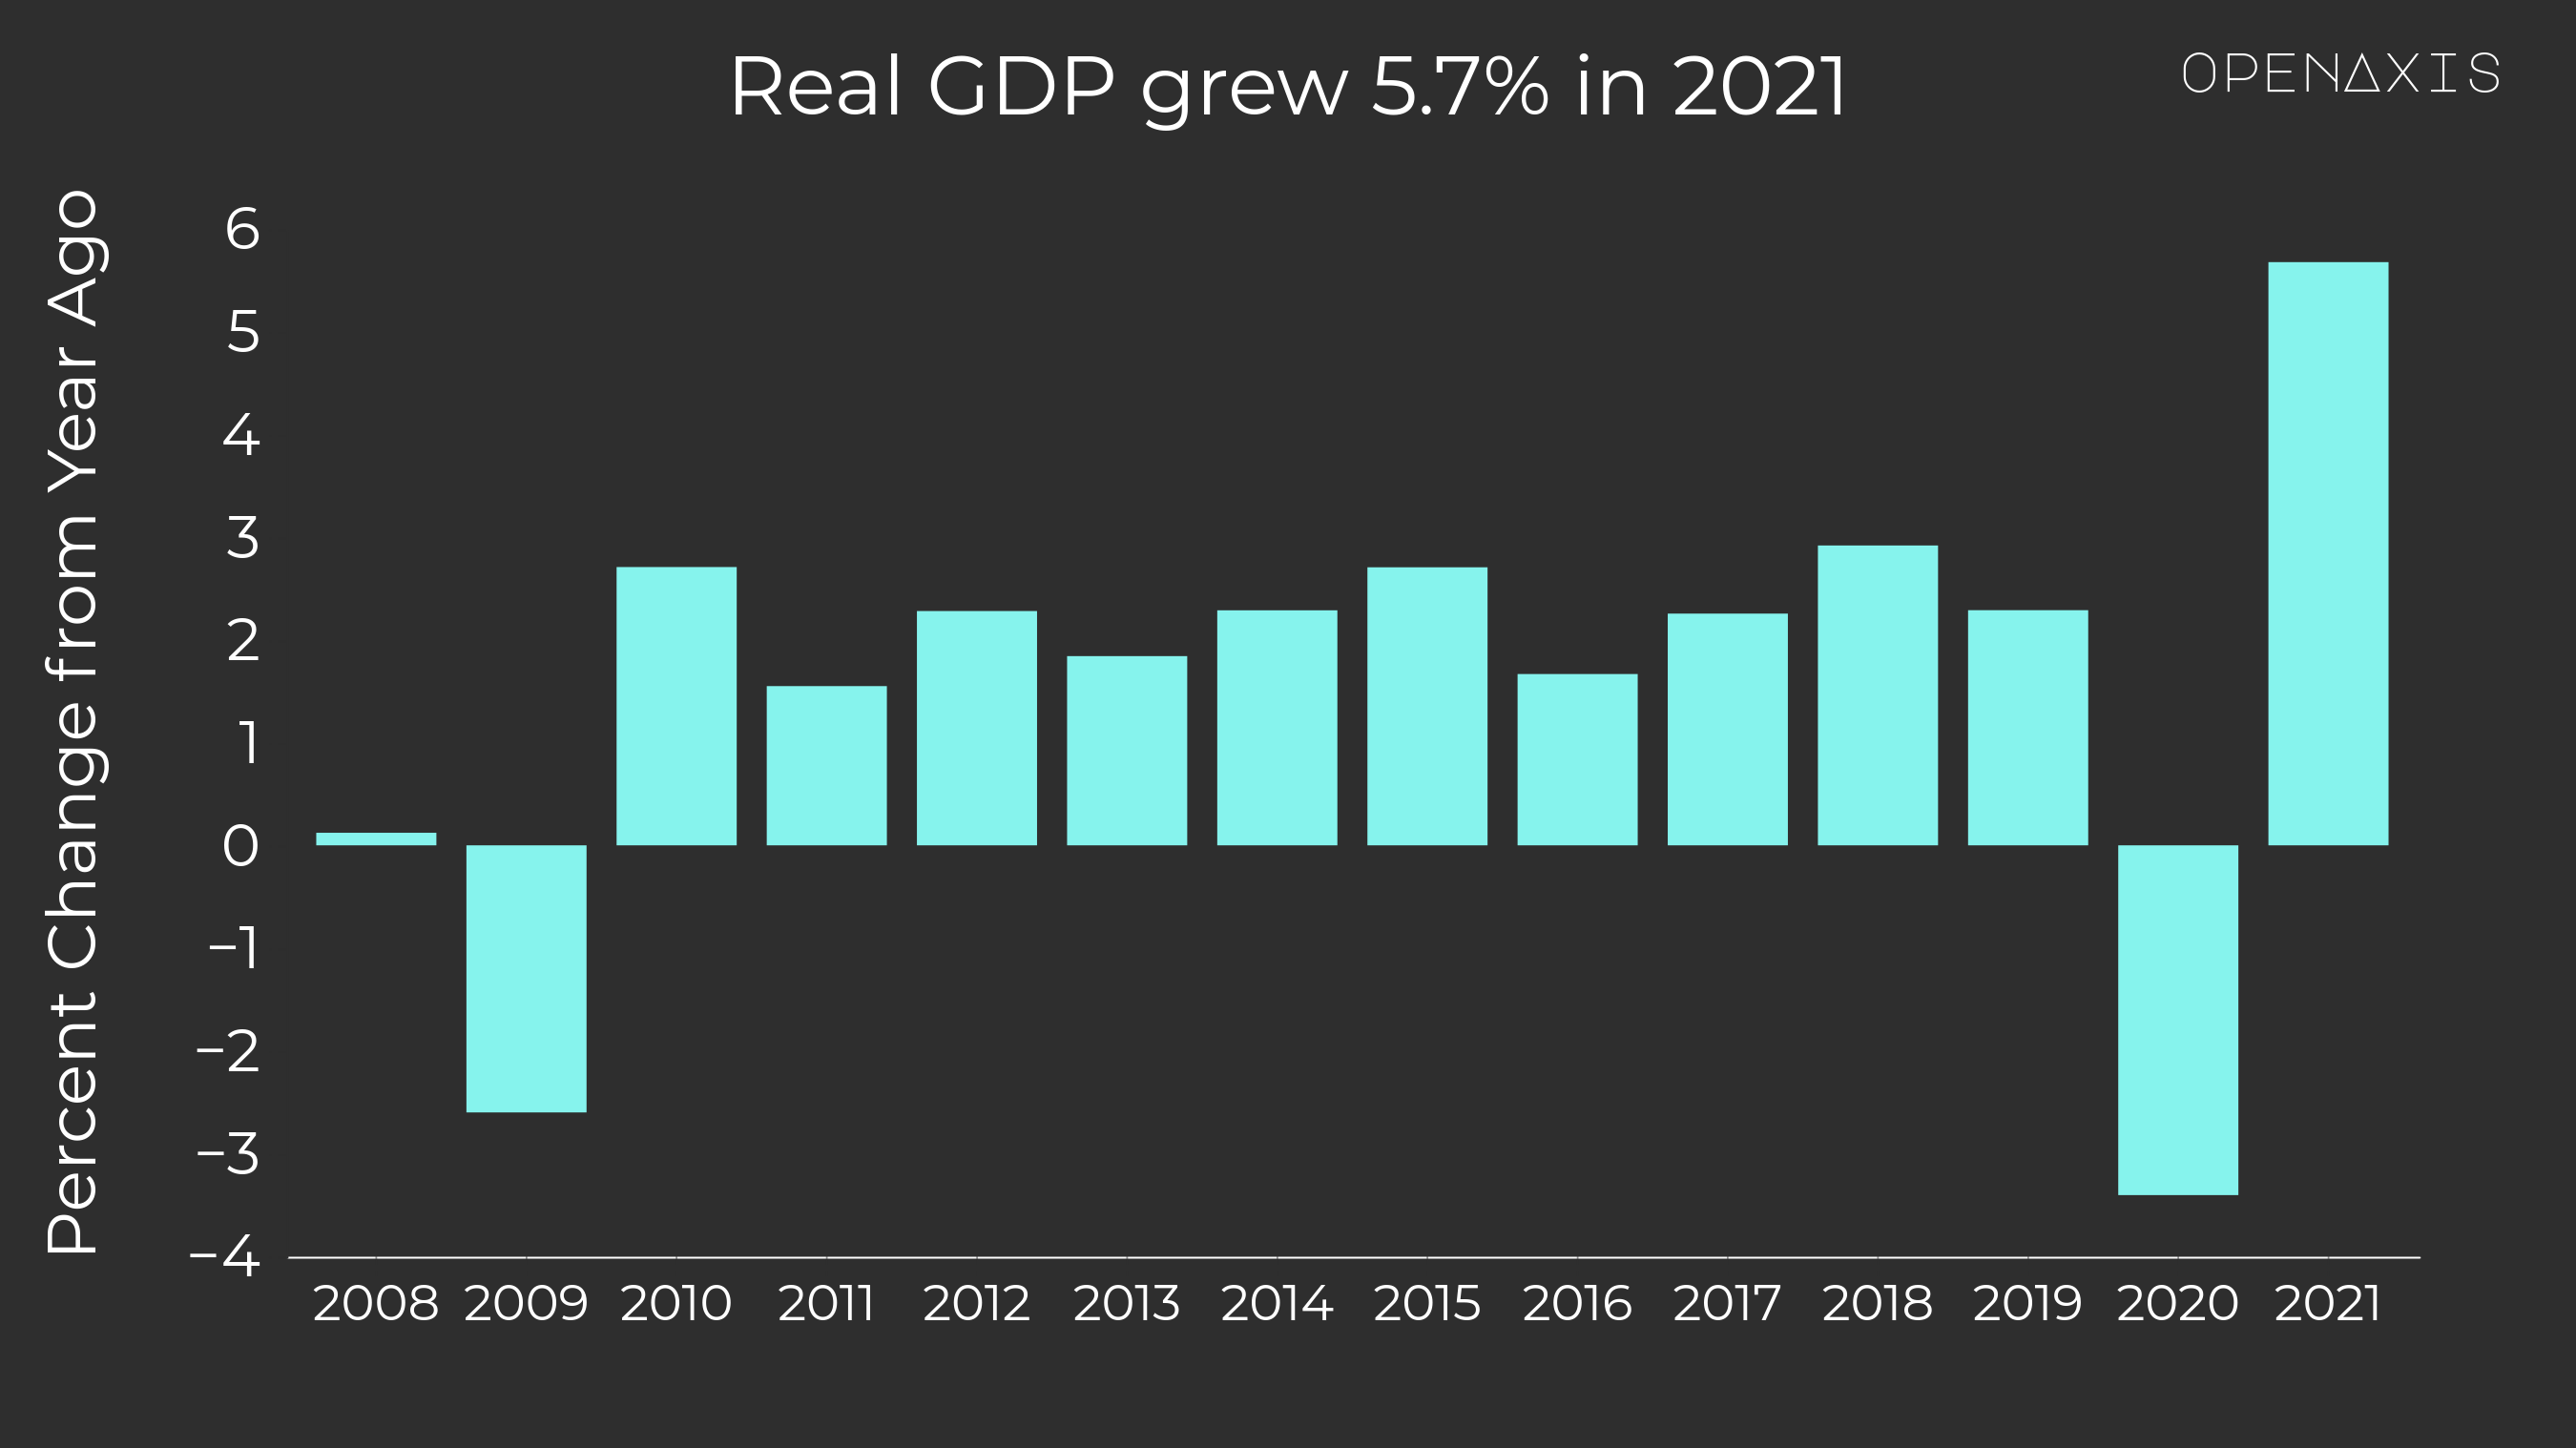 "Real GDP grew 5.7% in 2021"